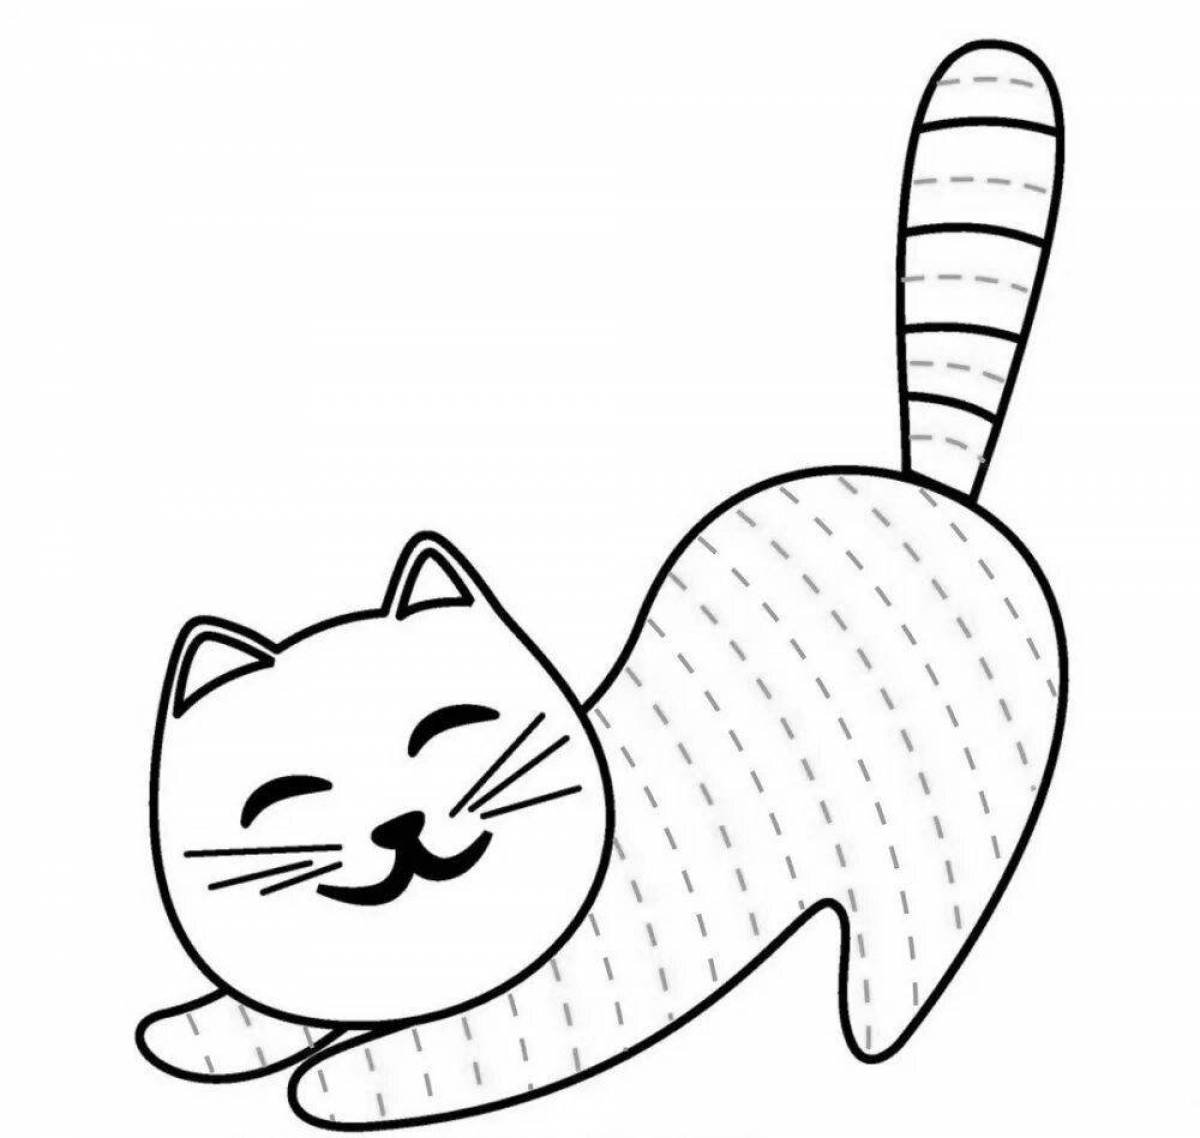 Adorable cat coloring book for kids 2-3 years old